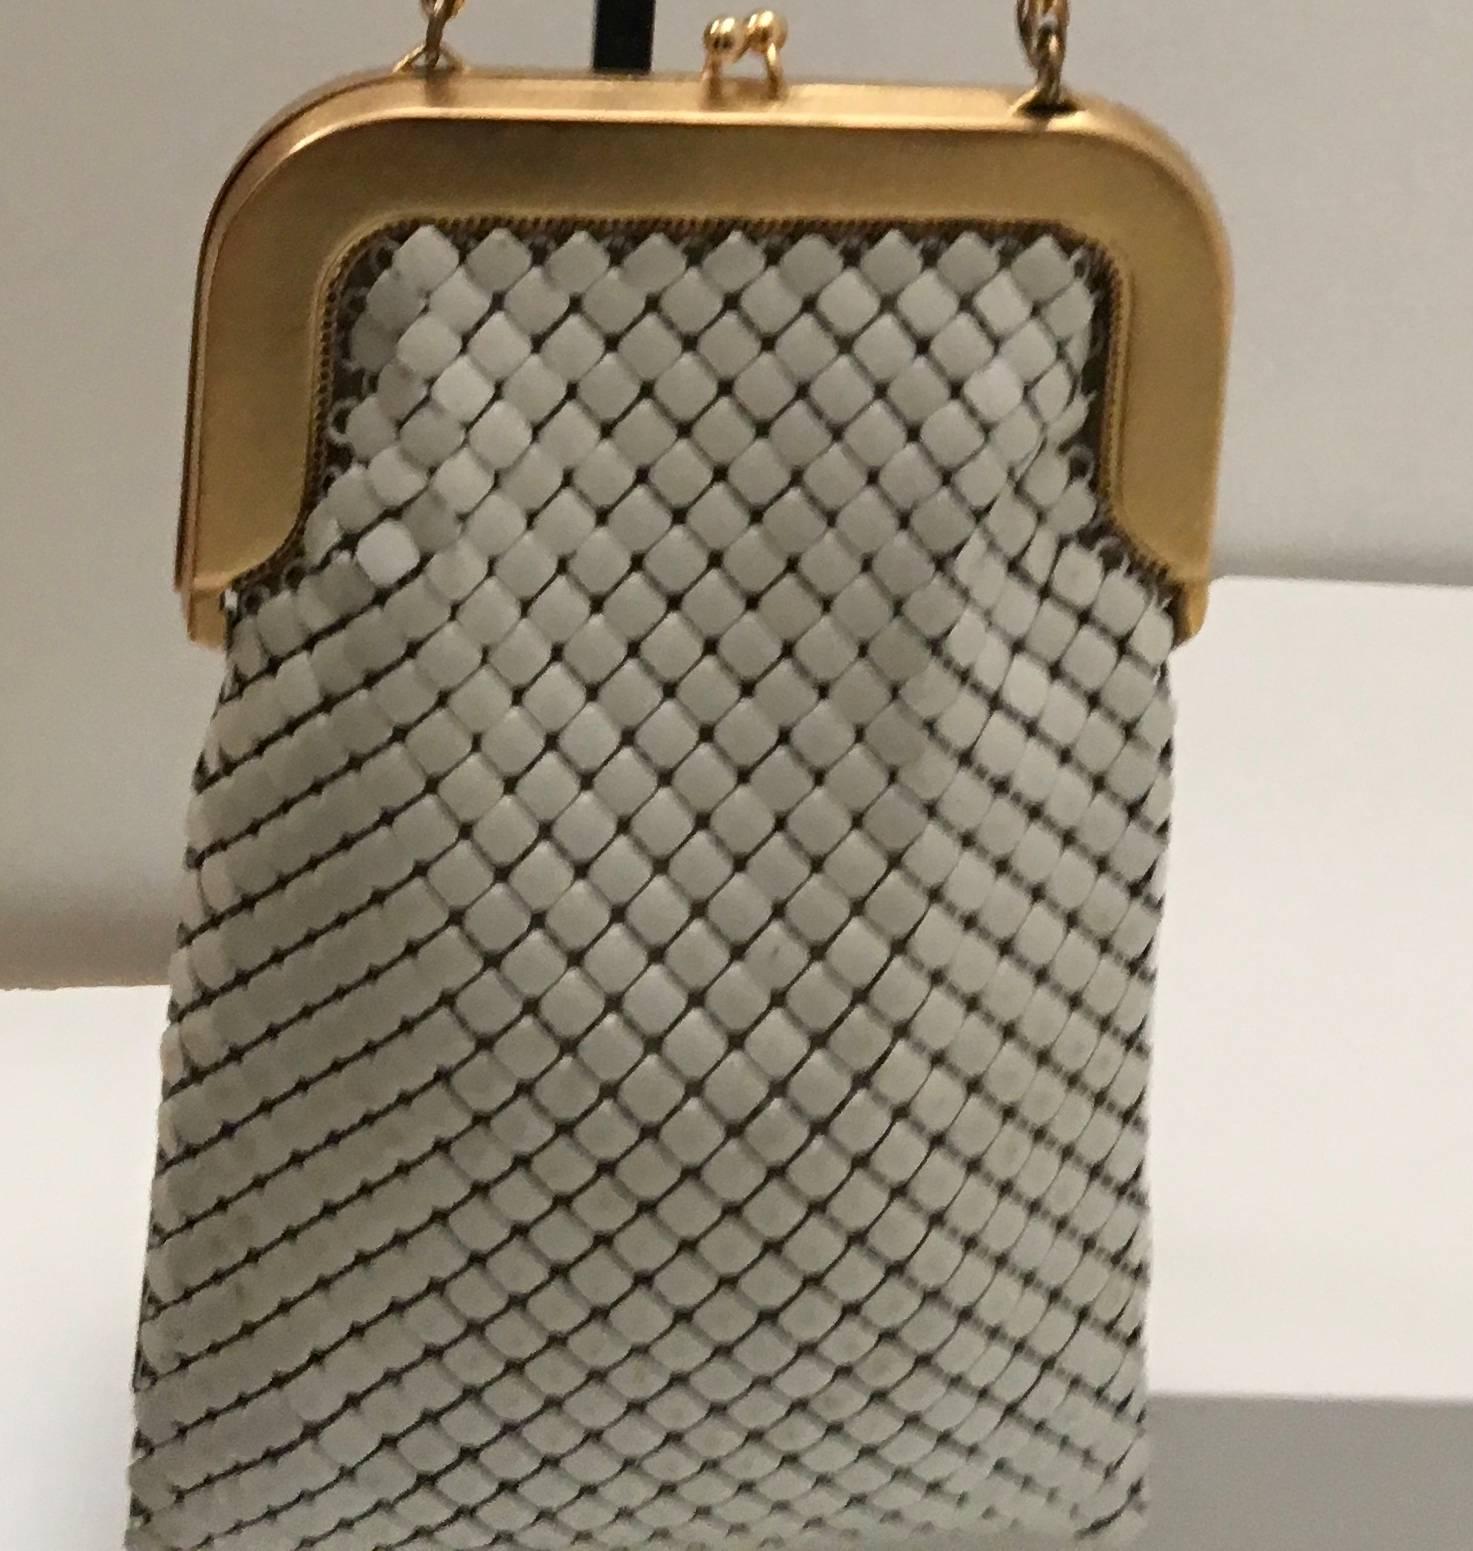 Presented here is a beautiful vintage Whiting and Davis white mesh evening bag from the 1970's. The purse is comprised of a beautiful shiny white tone metal coloring on the exterior of the bag. The gold tone metal chain is 30 inches long. The purse